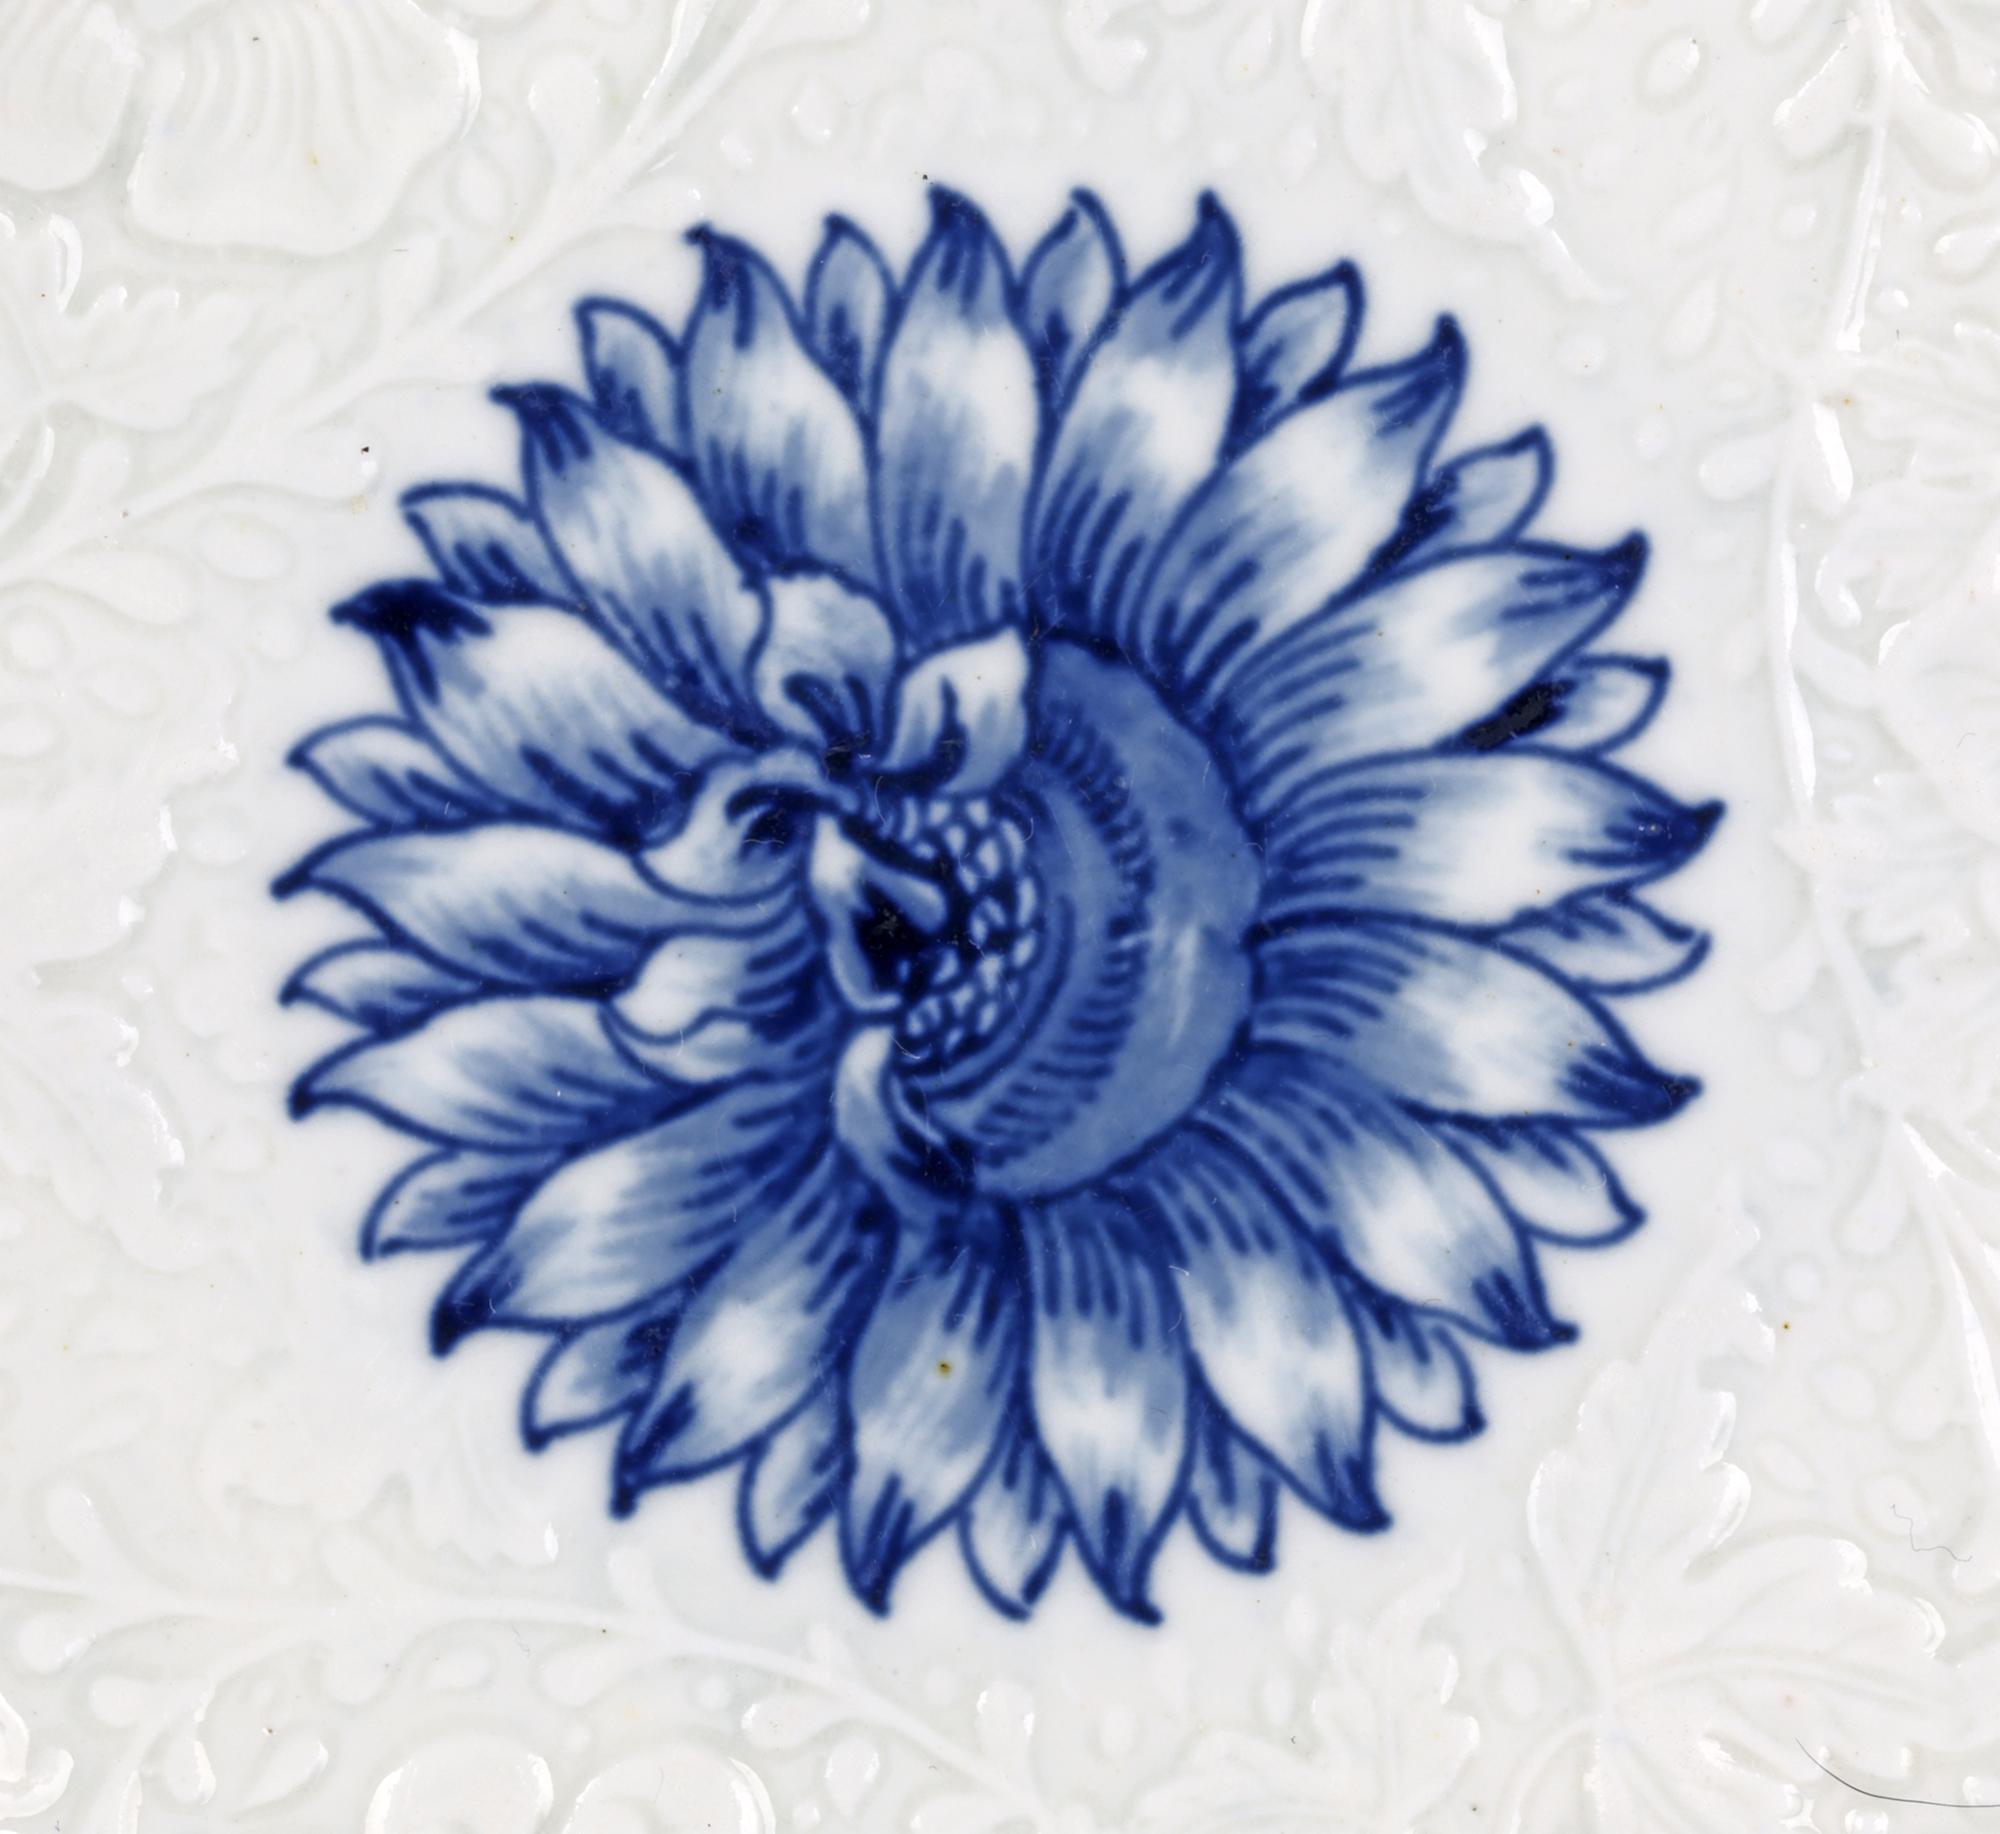 Originating from a private collection we offer this exceptional and very fine antique early Worcester porcelain saucer dish decorated in blue and white with a large Chrysanthemum flower dating between 1755 and 1760. The lightly made dish is of